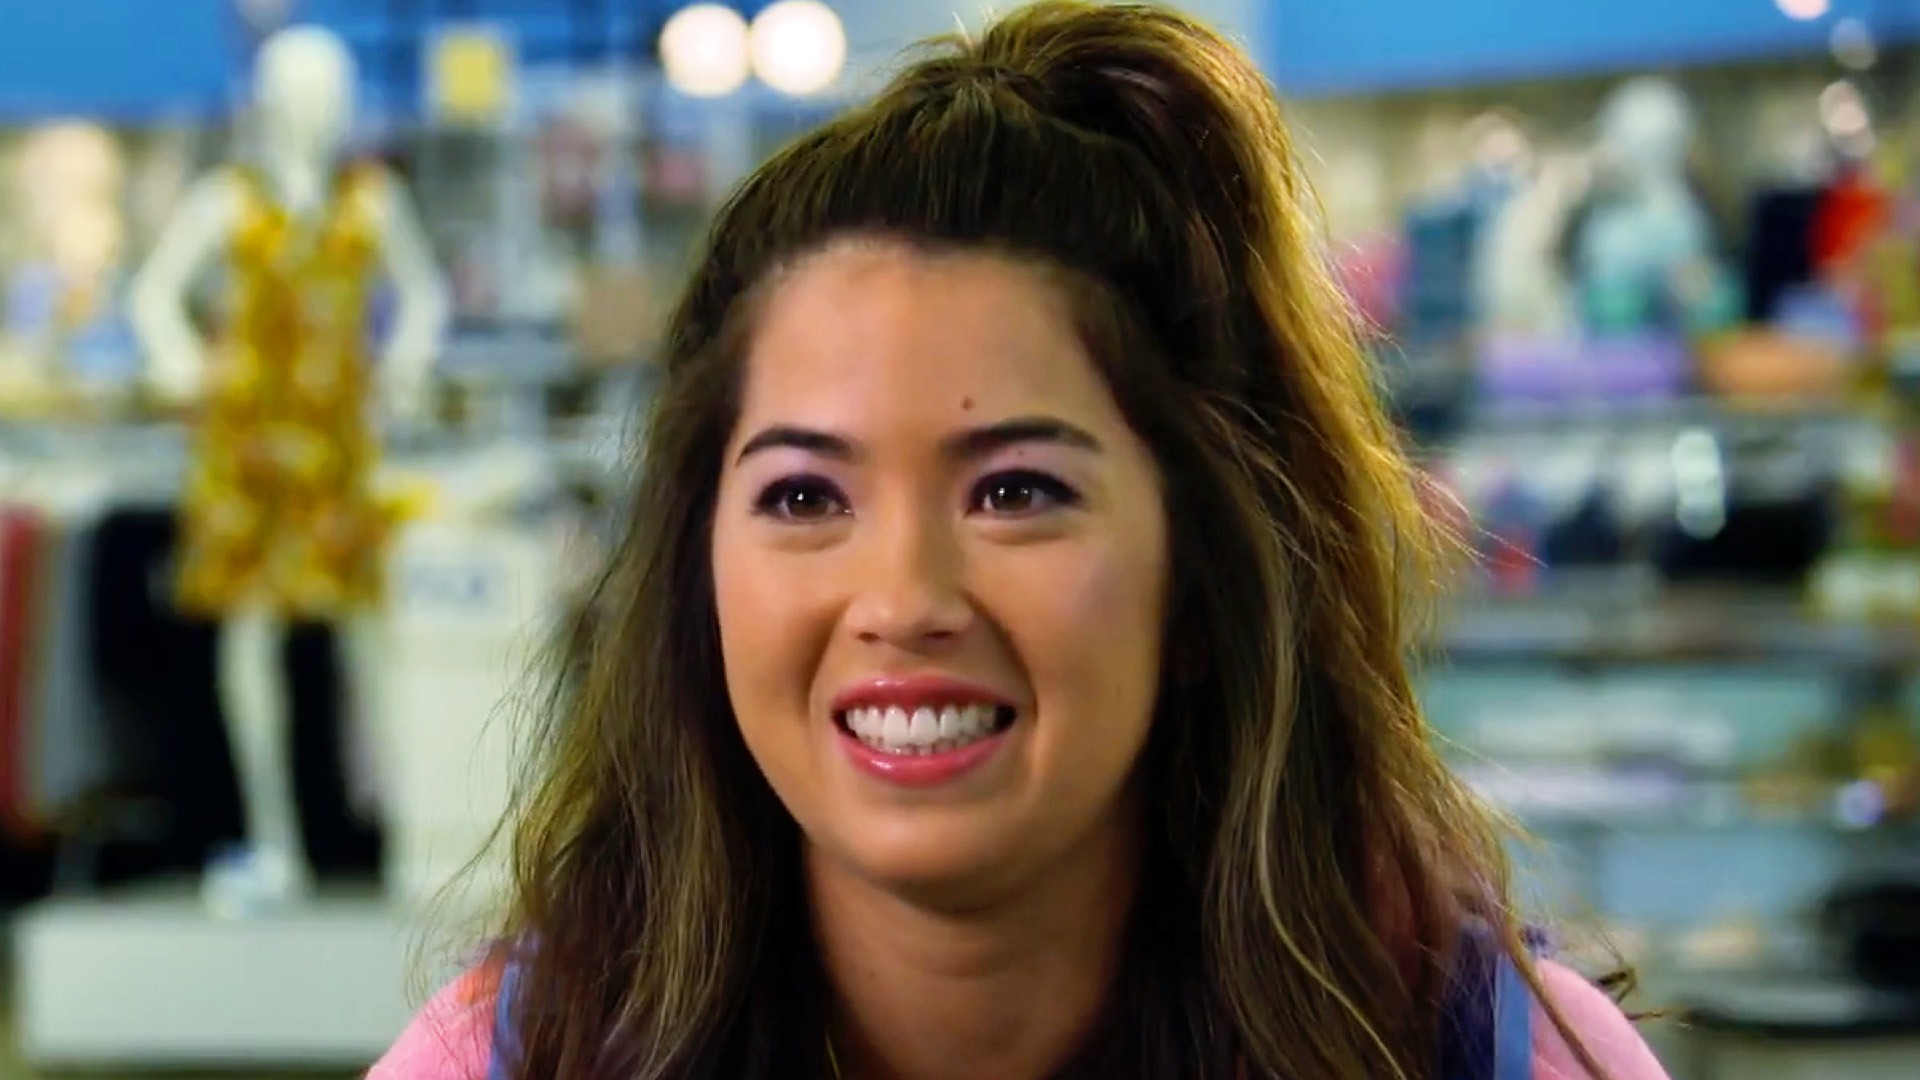 Superstore: EW Review